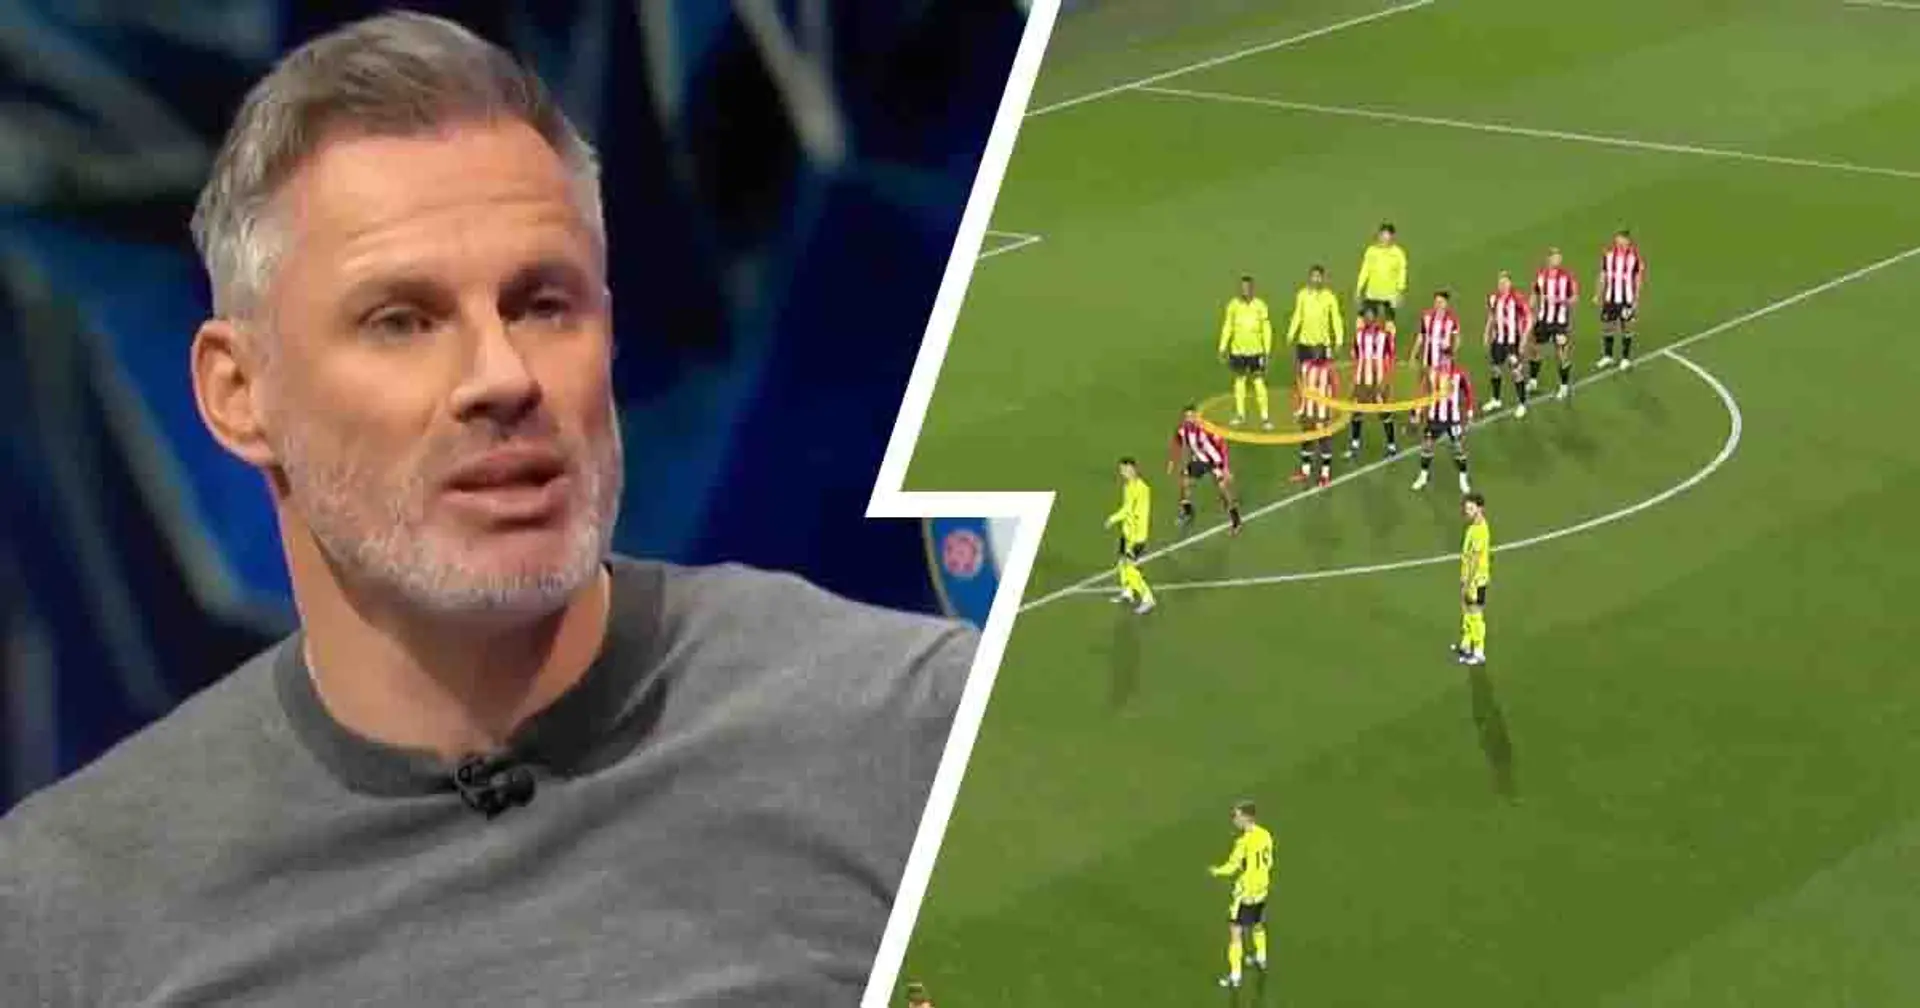 'Single-handedly trying to put pressure on refs': fans fume at Jamie Carragher for complaining about Arsenal’s tactics